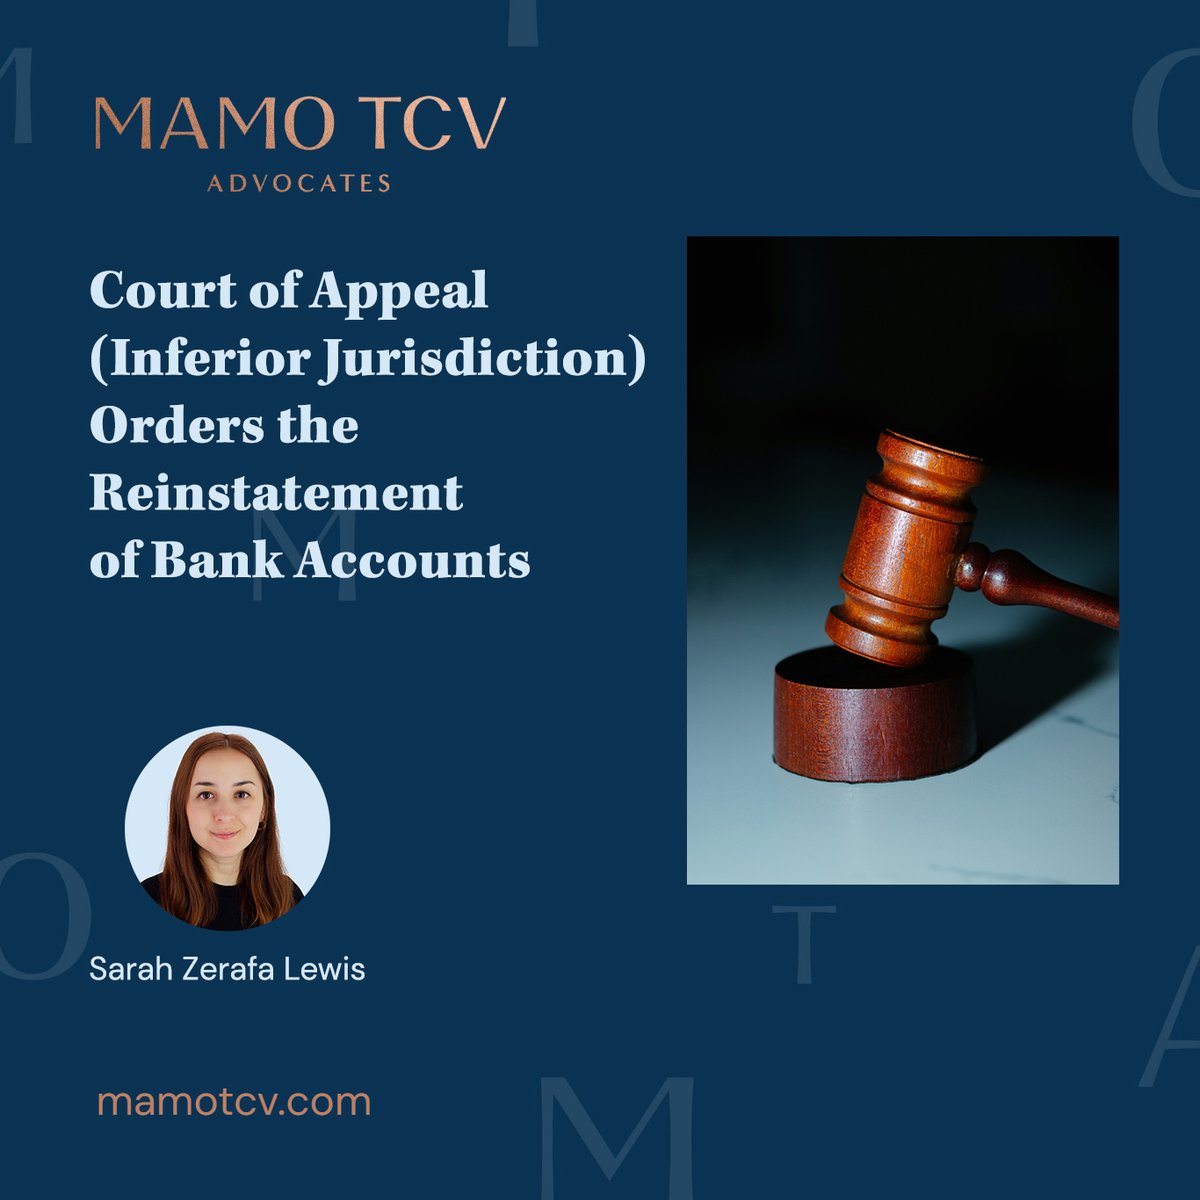 Find out more here mamotcv.com/insights/court…

#banking #arbiterforfinancialservices #courtofappeal #financialservices #bankingcaselaw #bankaccounts #mamotcv